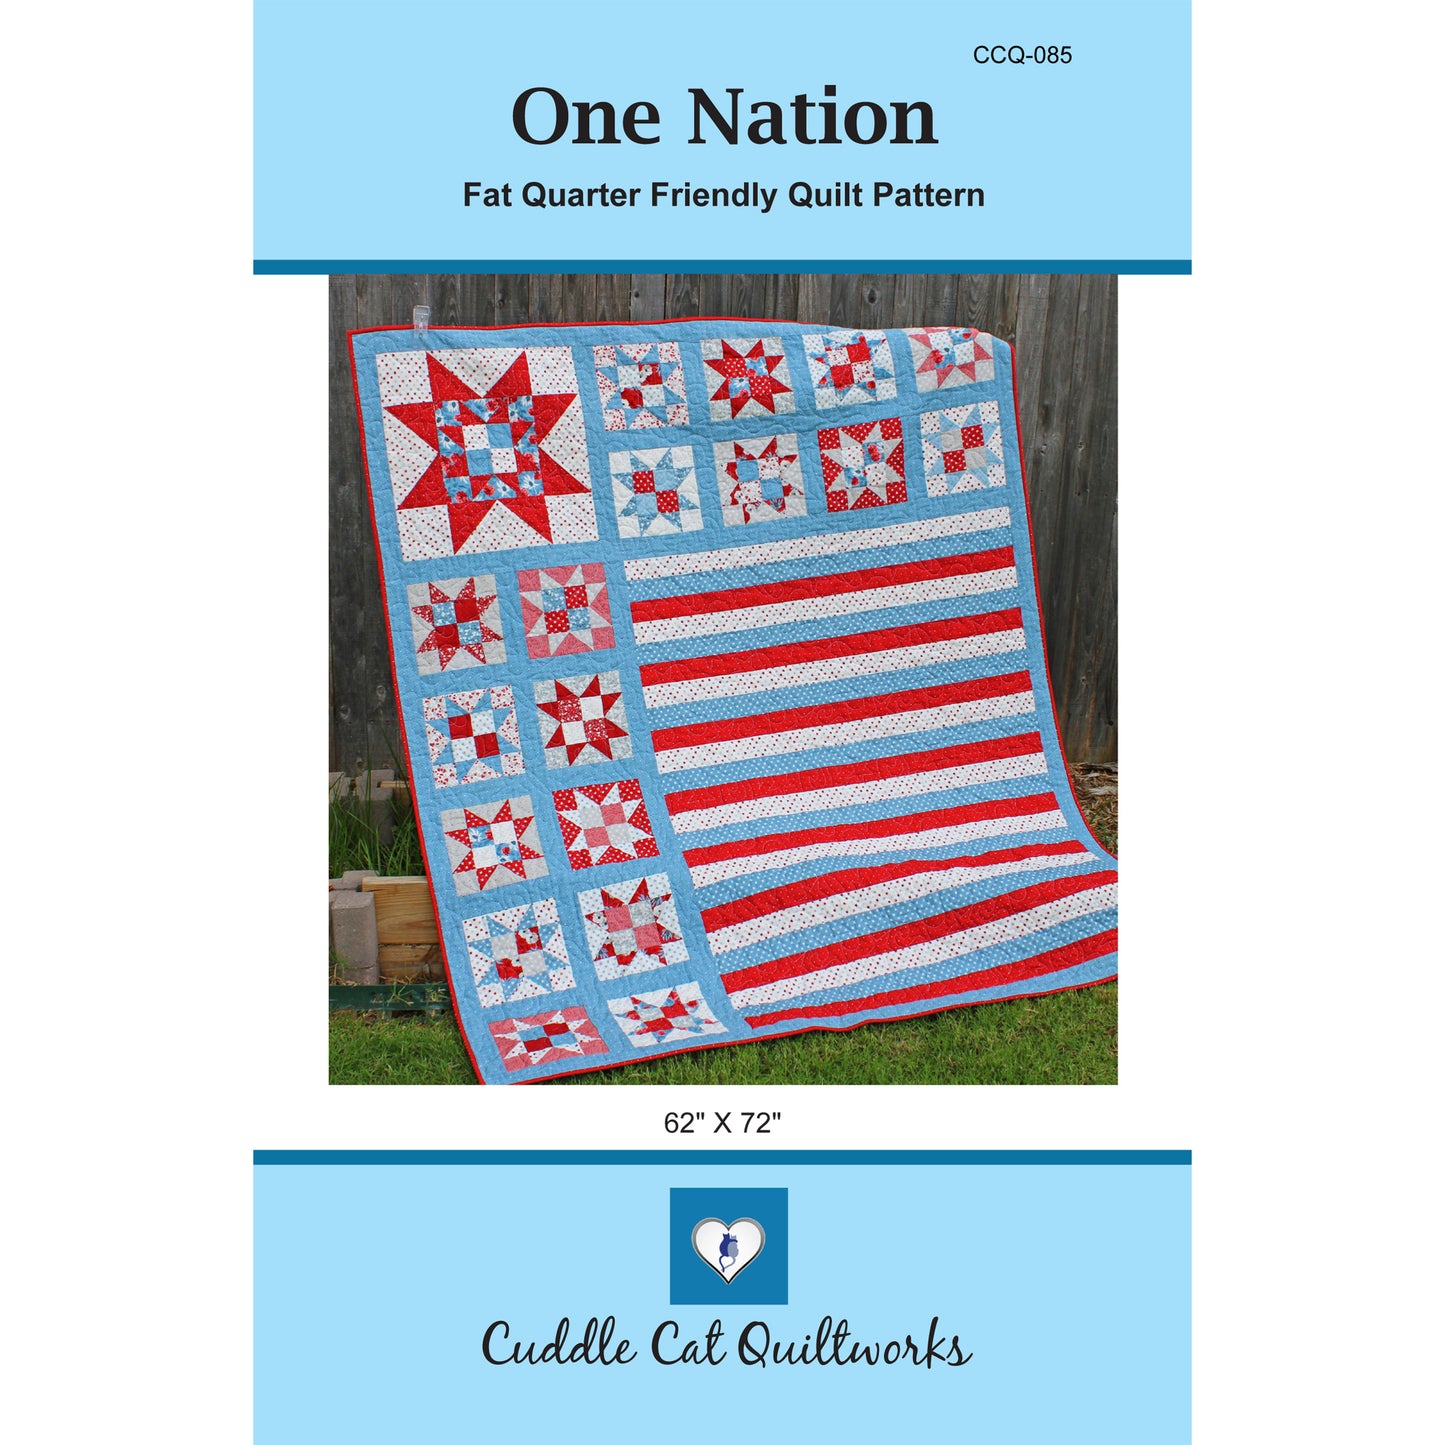 Cover image of pattern for One Nation Quilt.